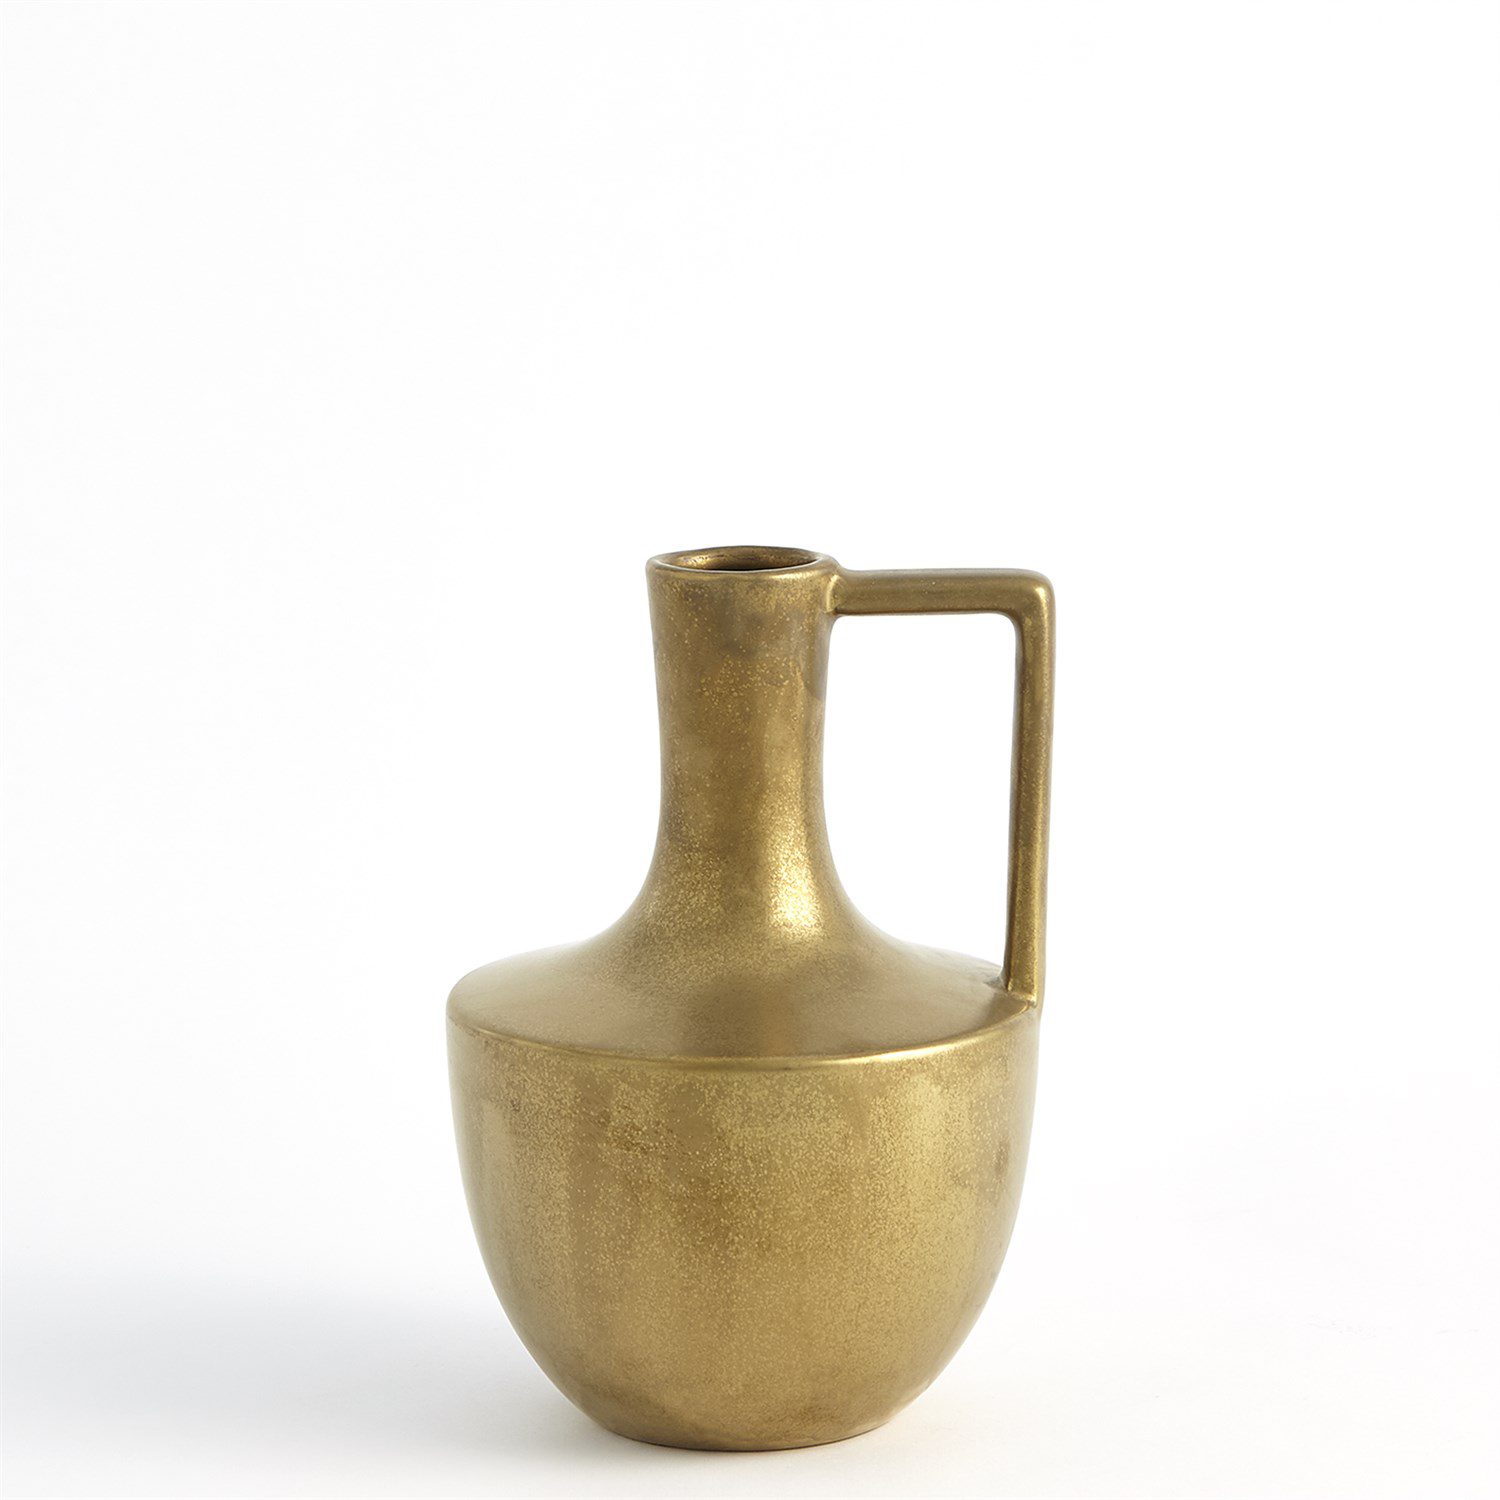 Reminiscent of Roman amphoras used to transport water, Our Handle Vases are ceramic with a mold-formed base and a hand-applied handle. Elegant antiqued electroplated gold finish. Dimensions Overall 10.25"H x 7"Dia. (3.2 lbs) Dust with dry cloth